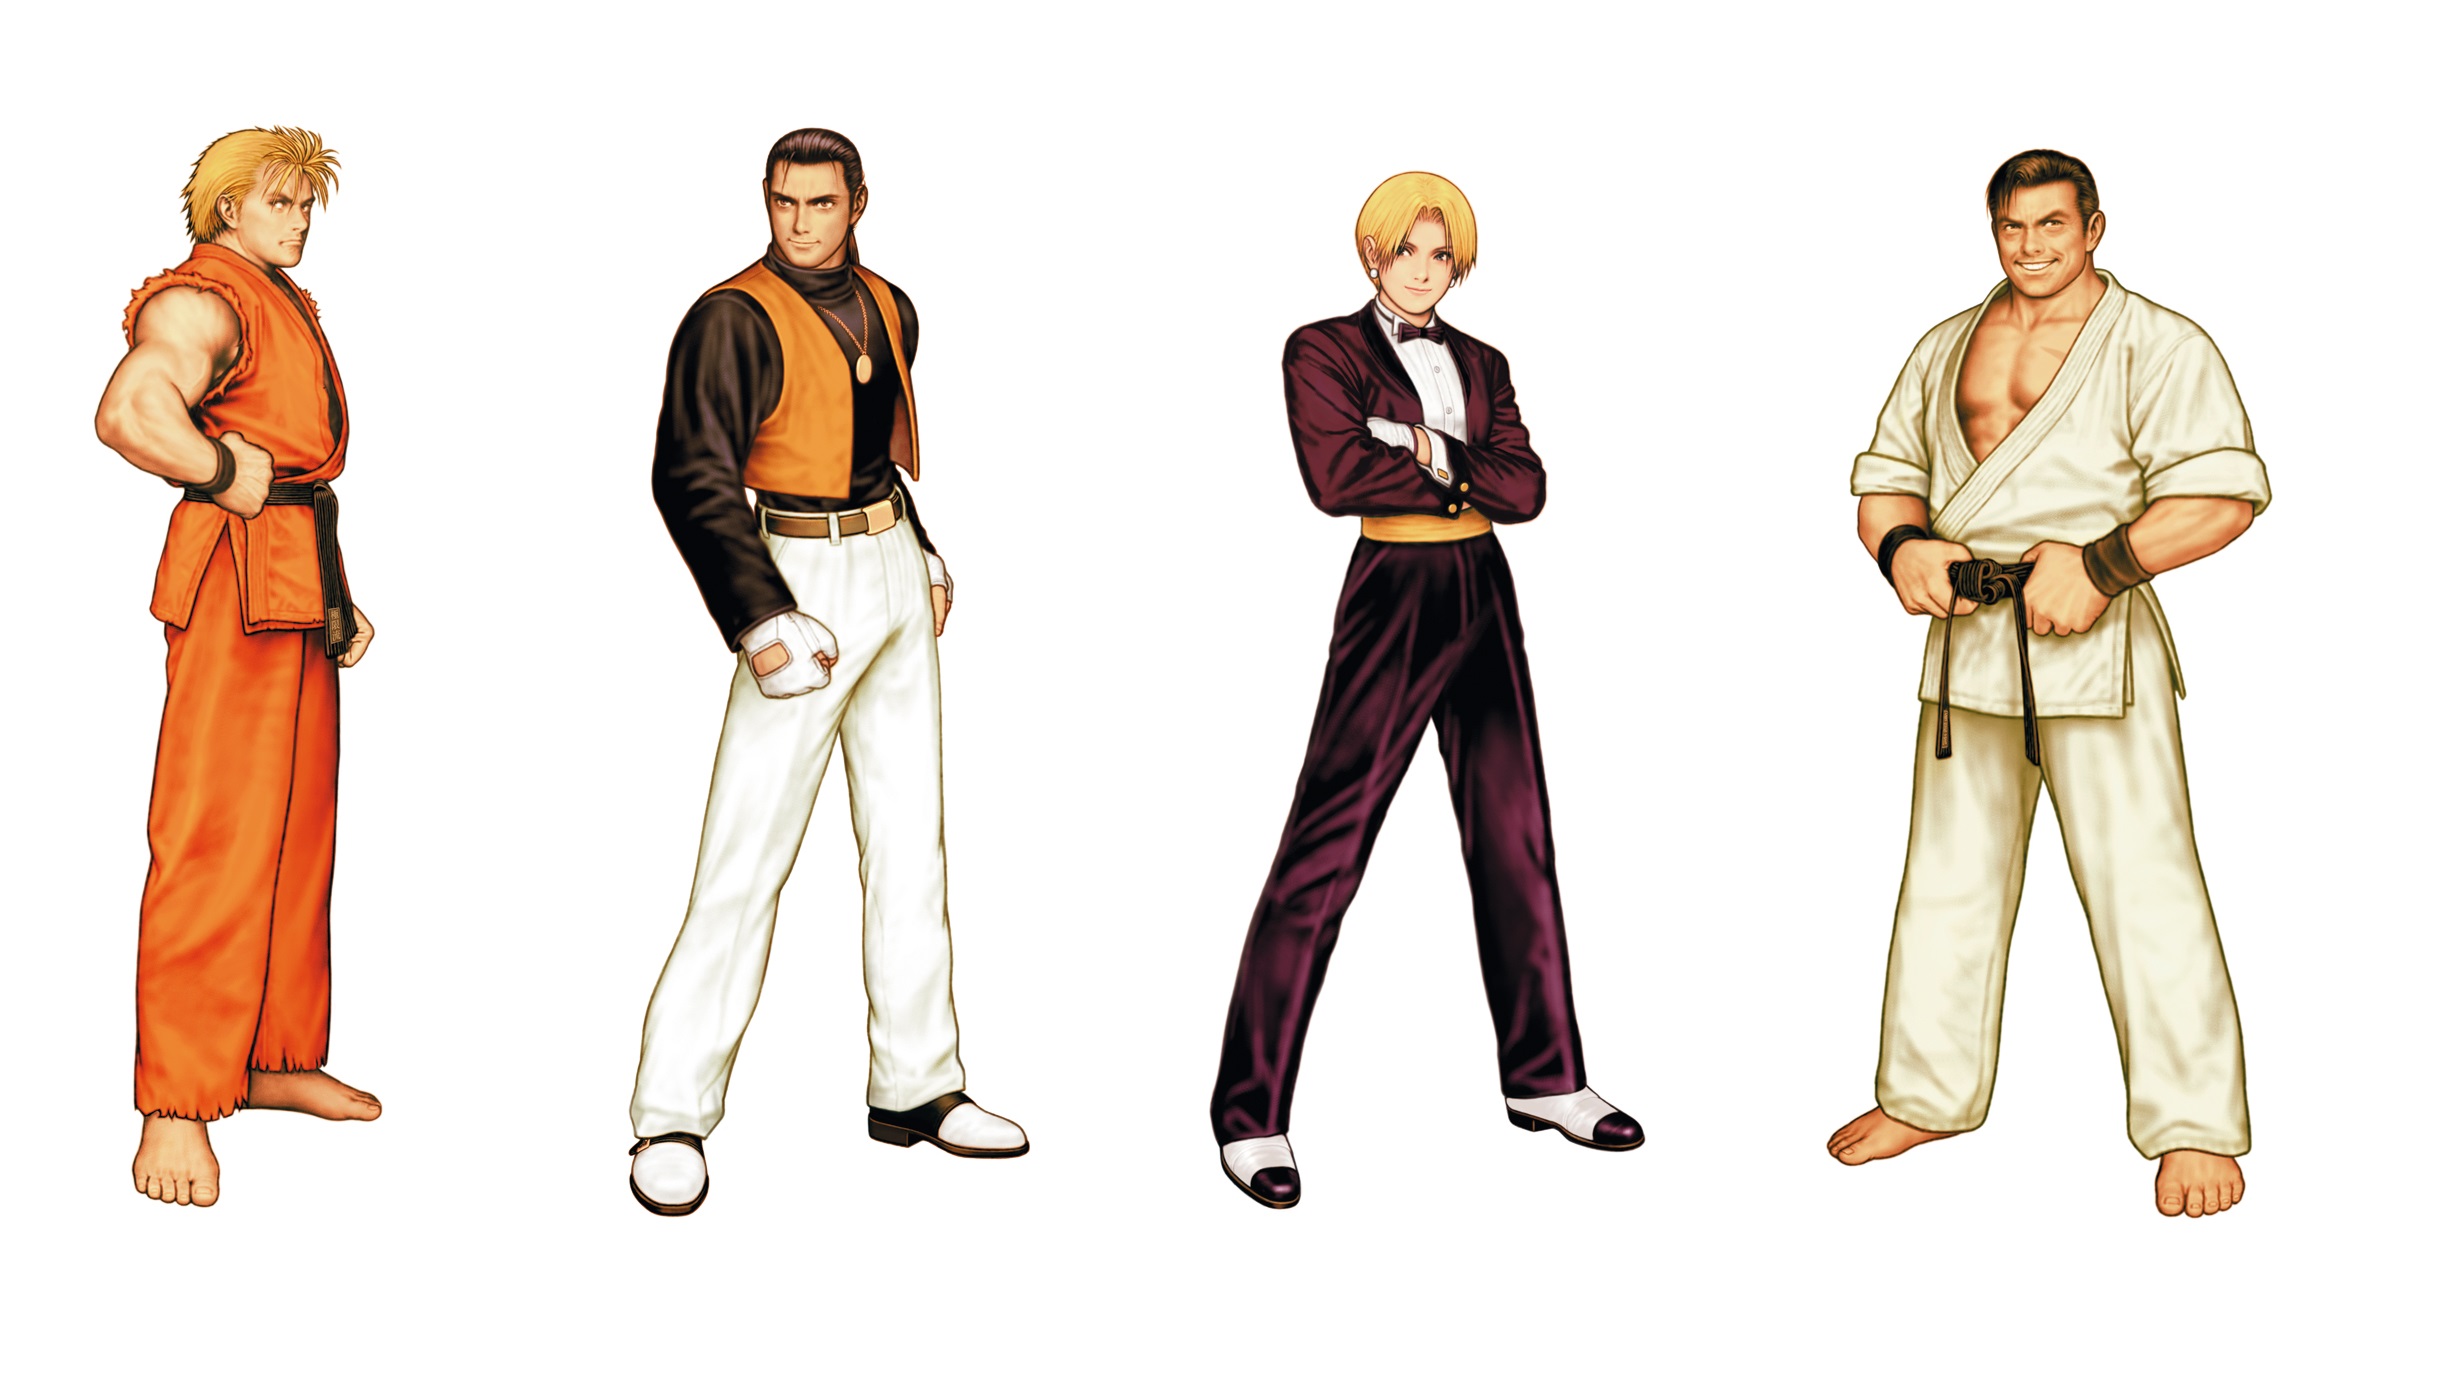 King Of Fighters 94 Women Fighters Team by hes6789 on DeviantArt